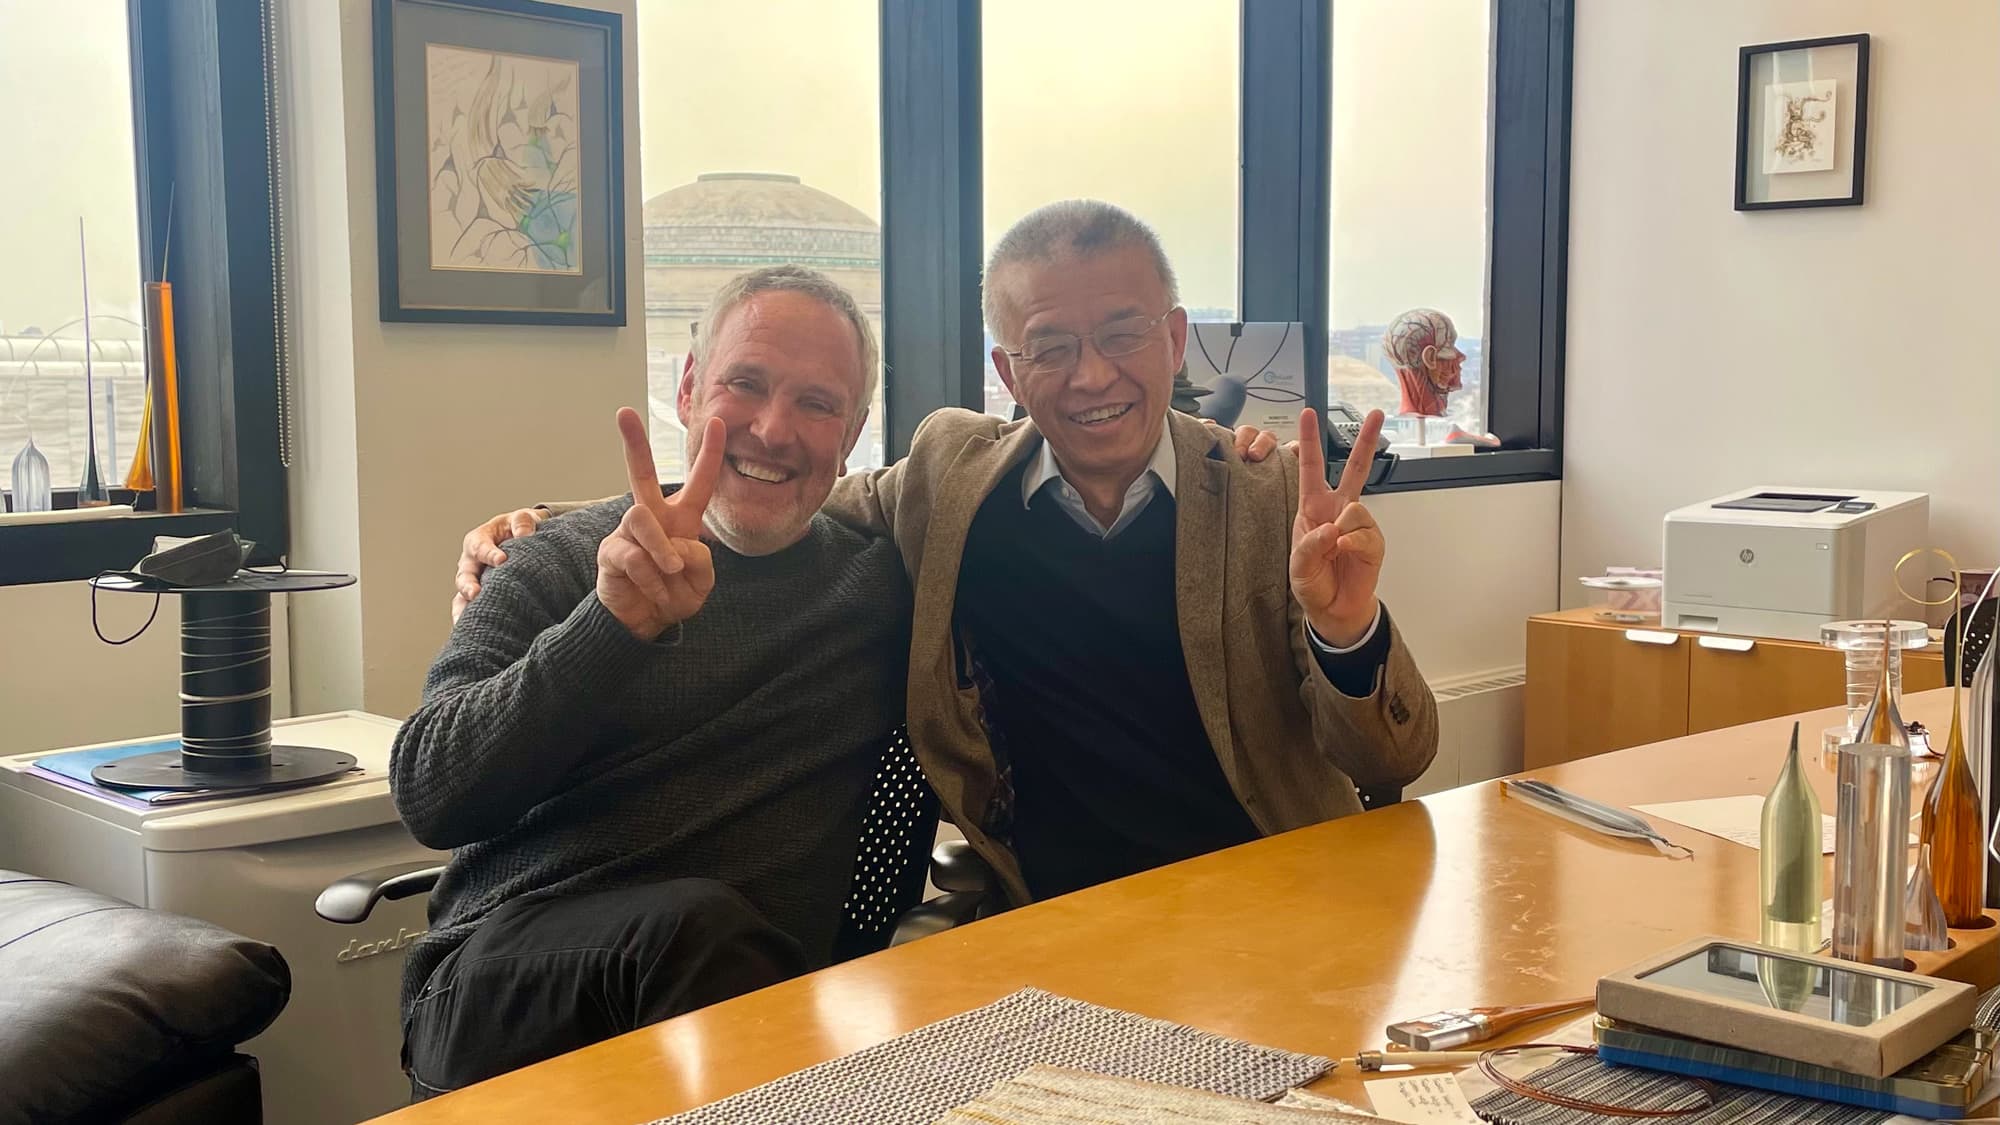 Yoel Fink and Gang Chen meet at M.I.T. for the first time after the case against Chen was dismissed. (Courtesy Yoel Fink)